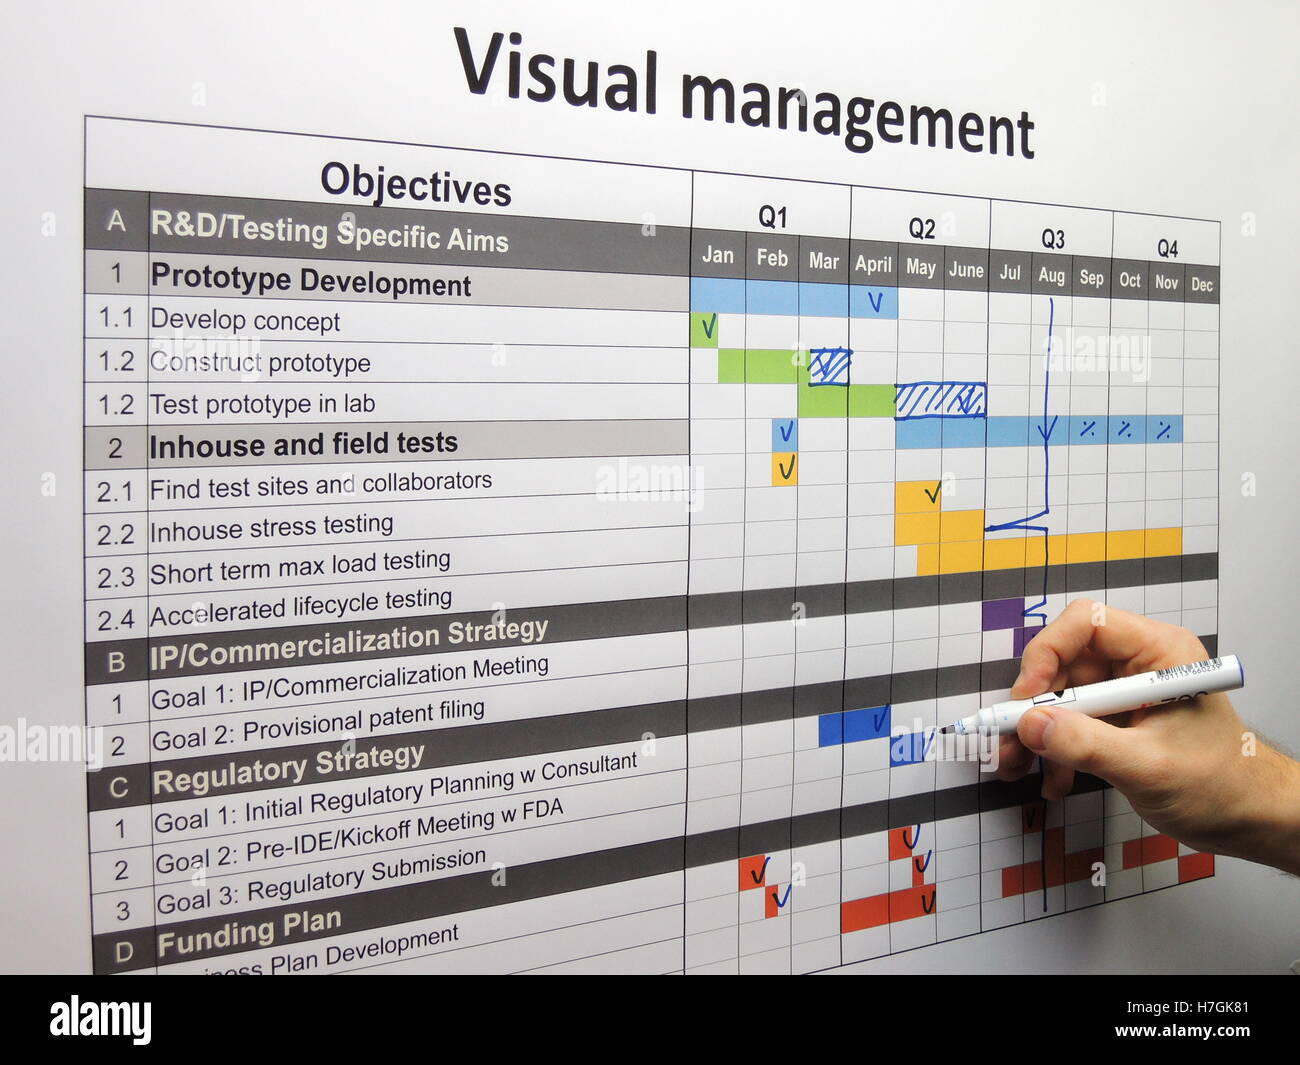 Updating the project plan using visual management. Done tasks and backspikes are shown. Stock Photo